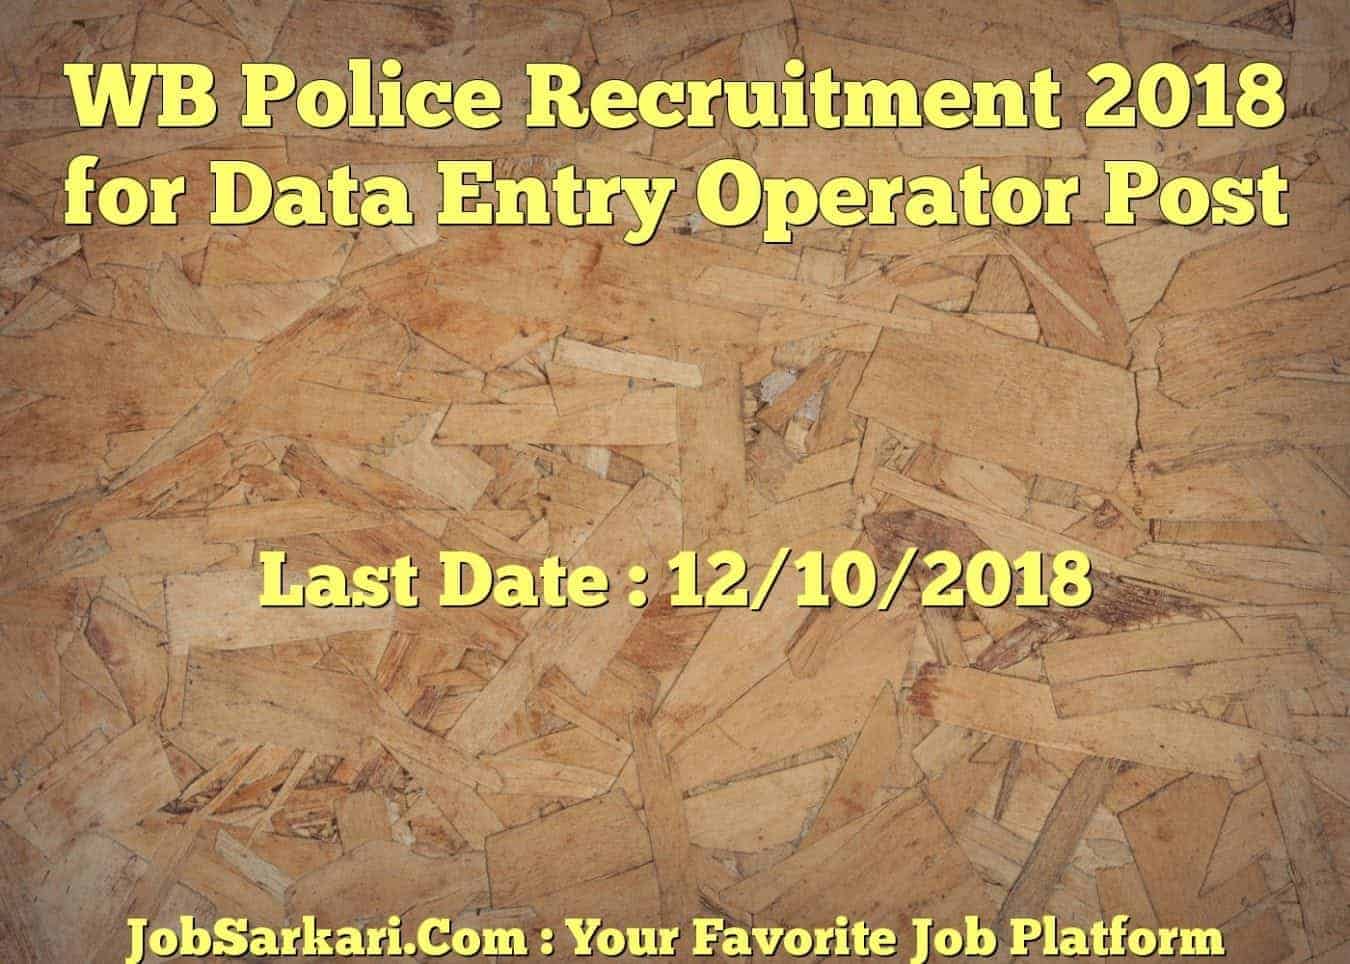 WB Police Recruitment 2018 for Data Entry Operator Post